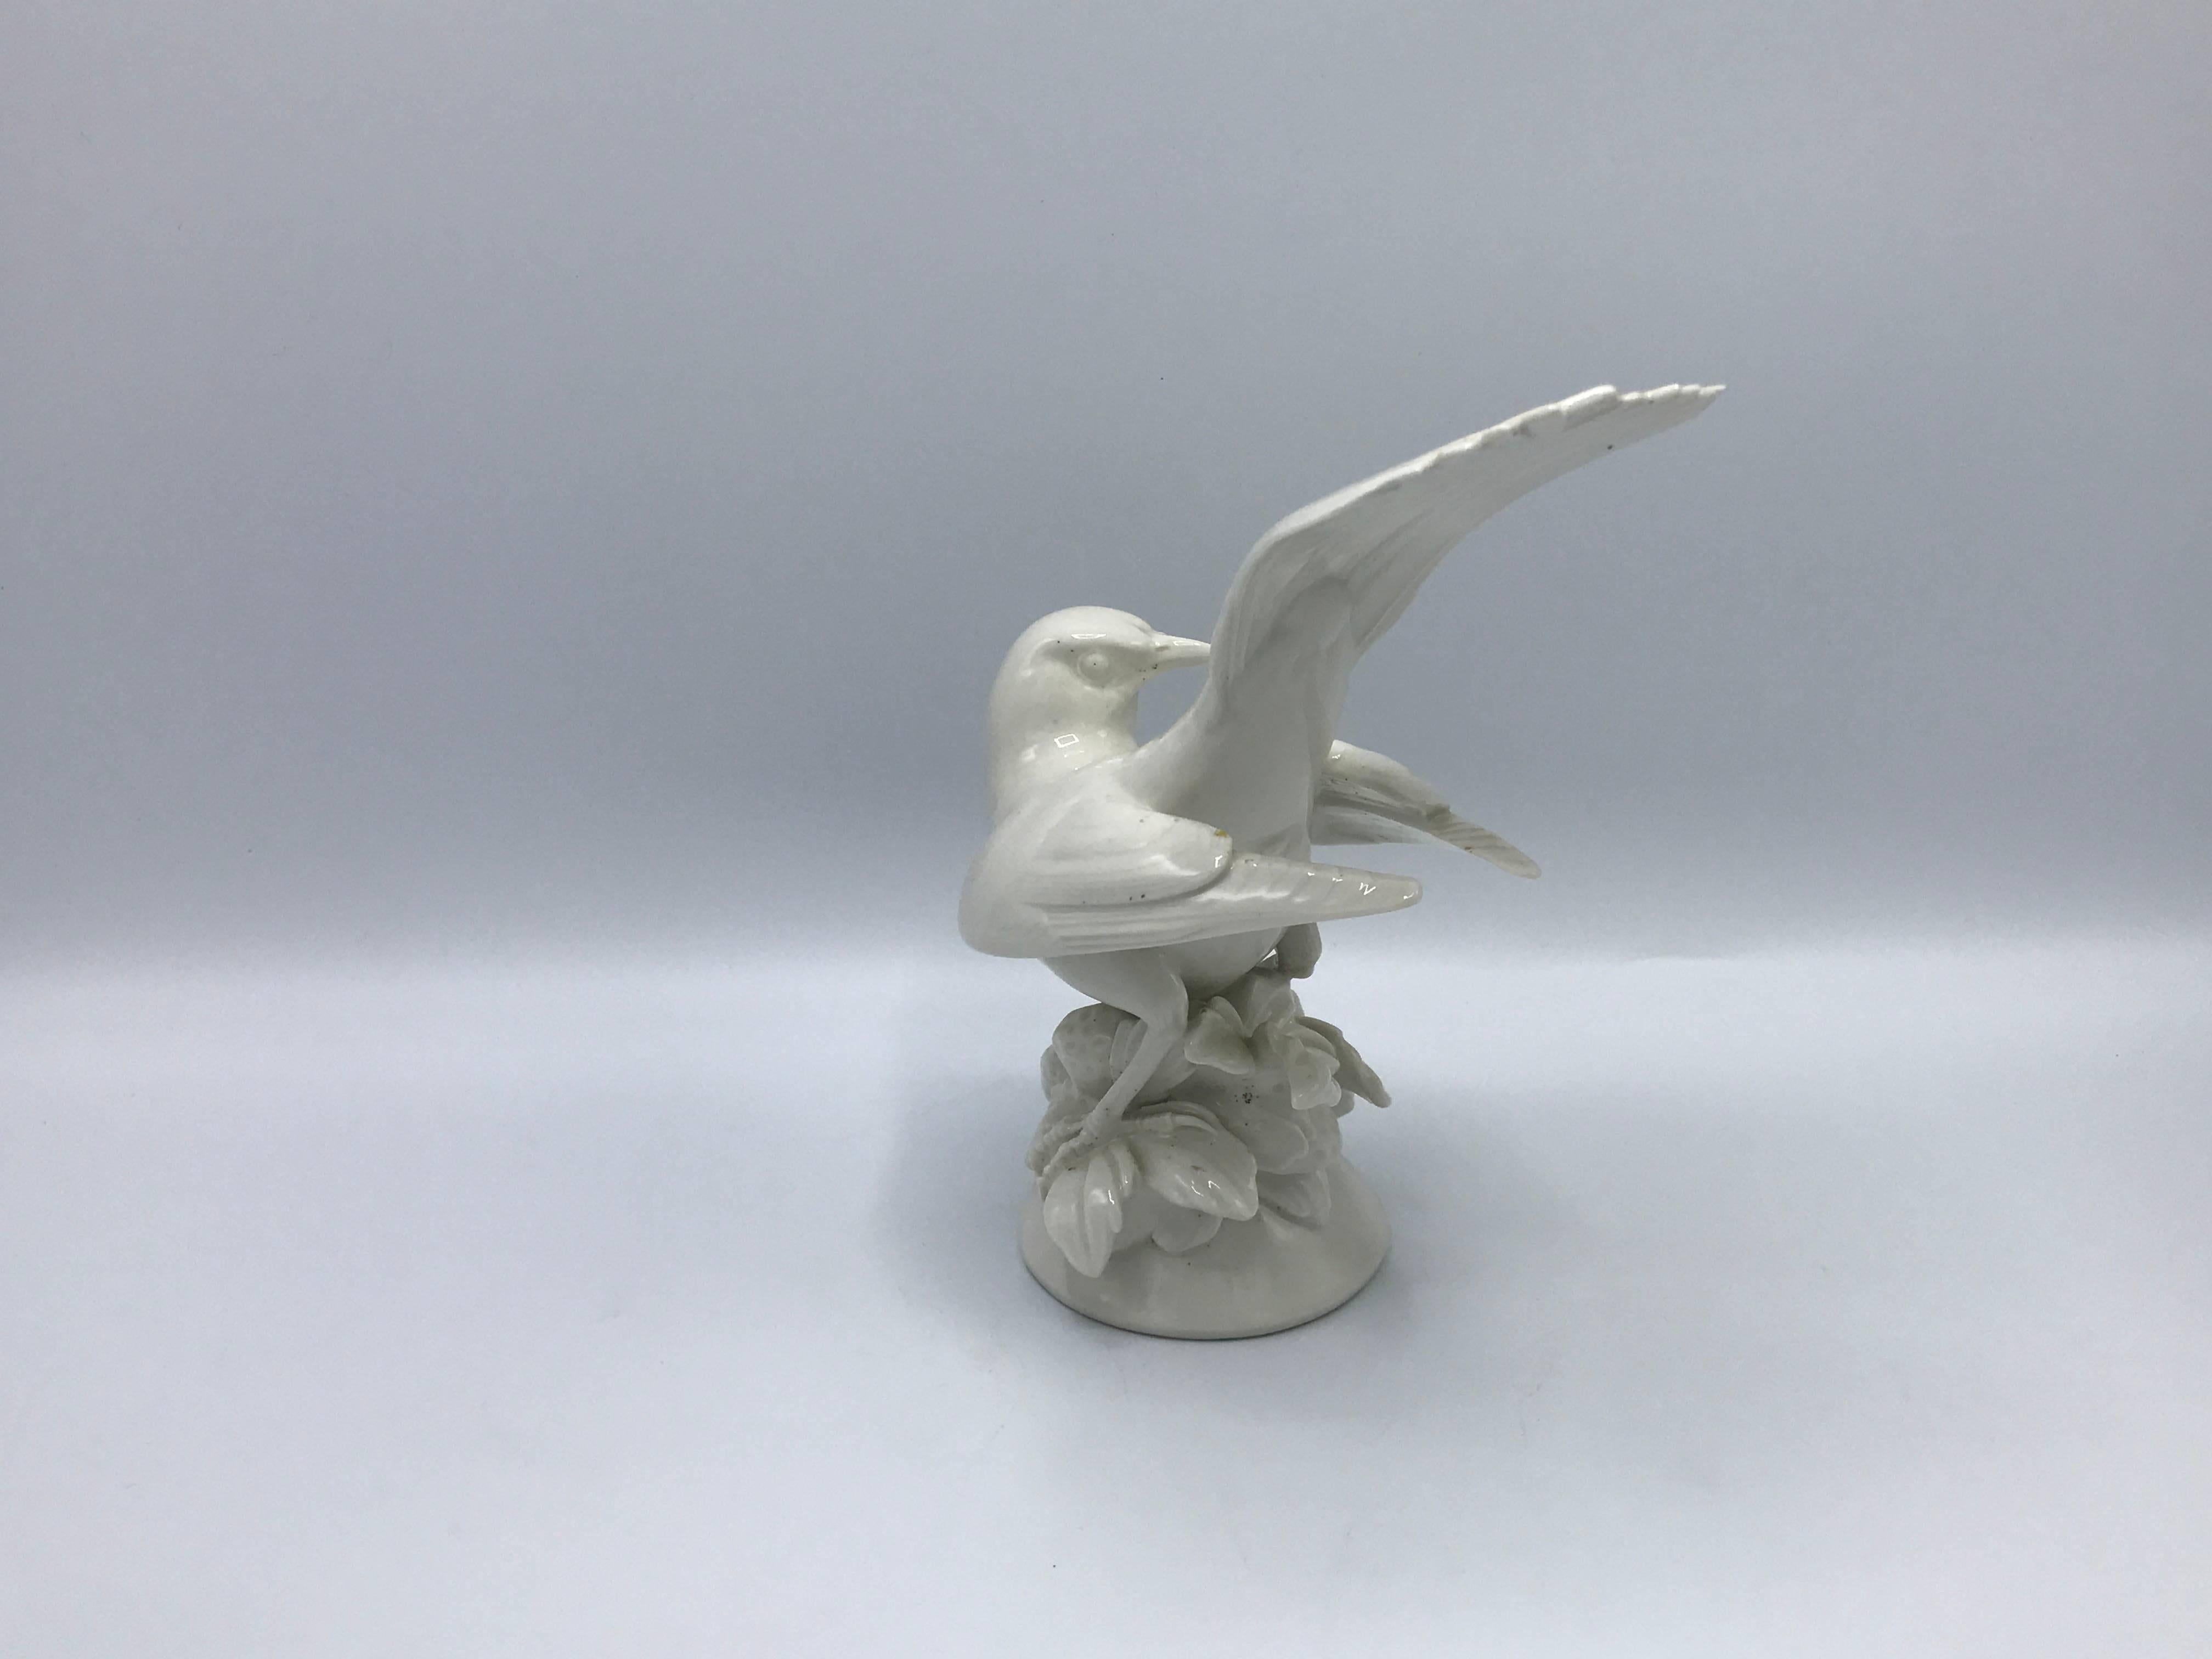 Offered is a gorgeous, 1960s Blanc de Chine bird statue figurine.